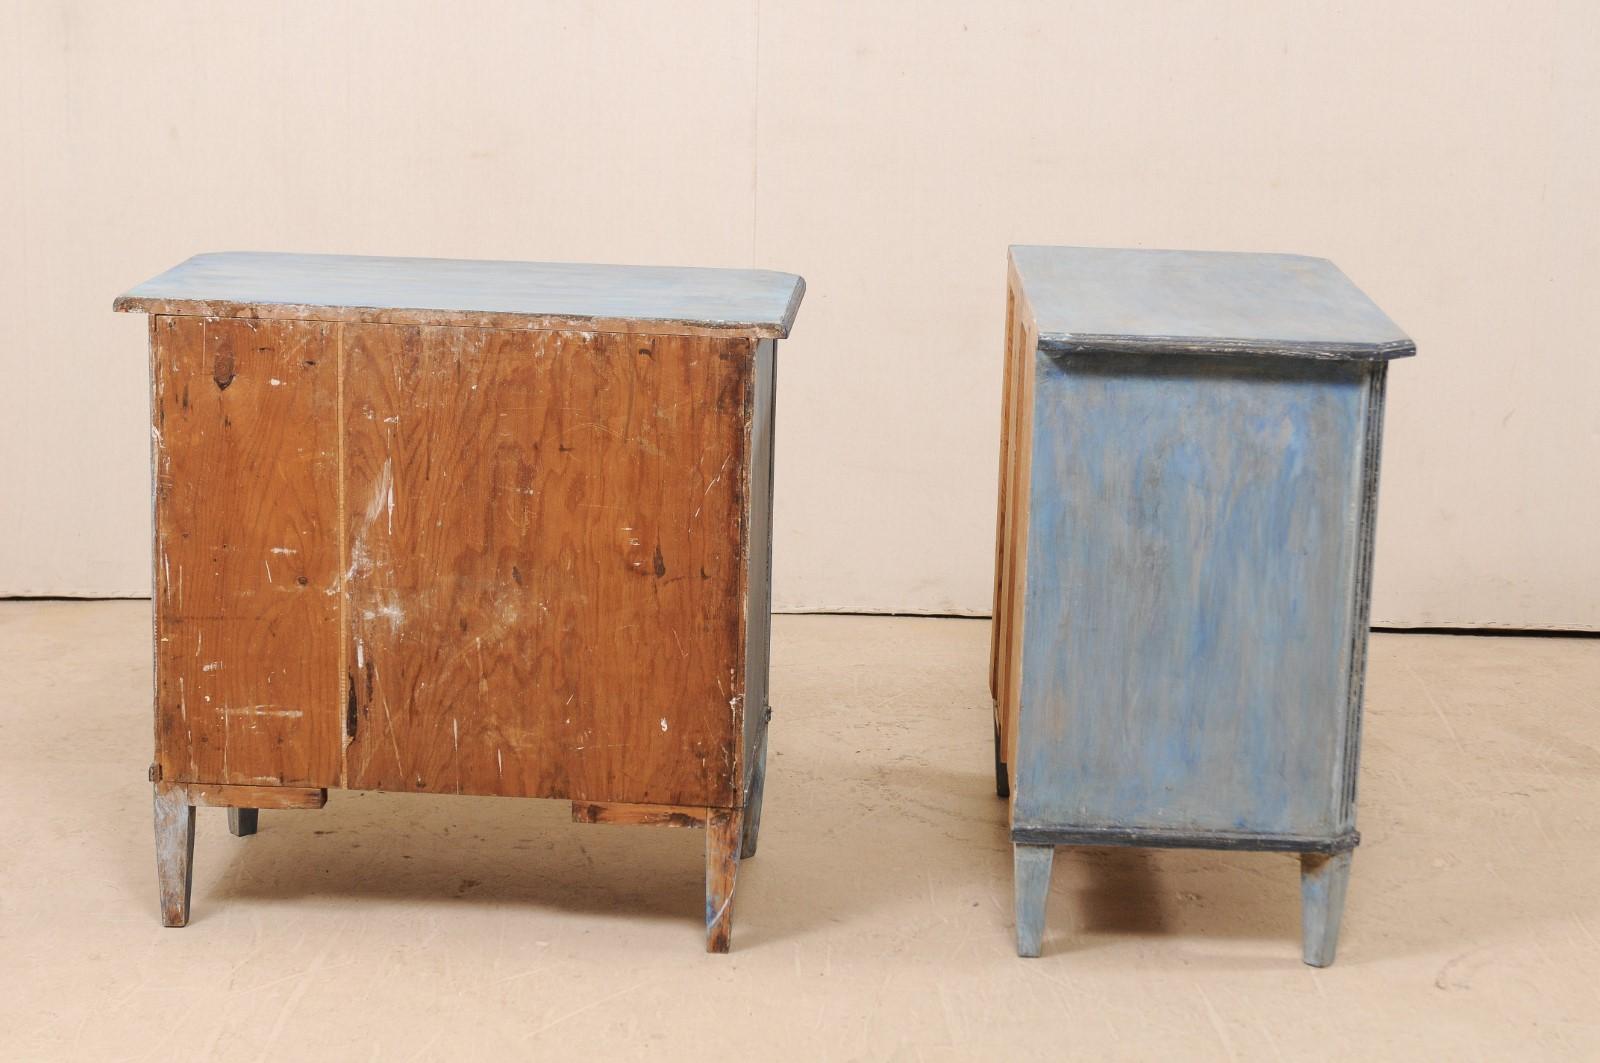 Pair of Swedish Midcentury Painted Wood Three-Drawer Chests in Soft Blue Finish 4